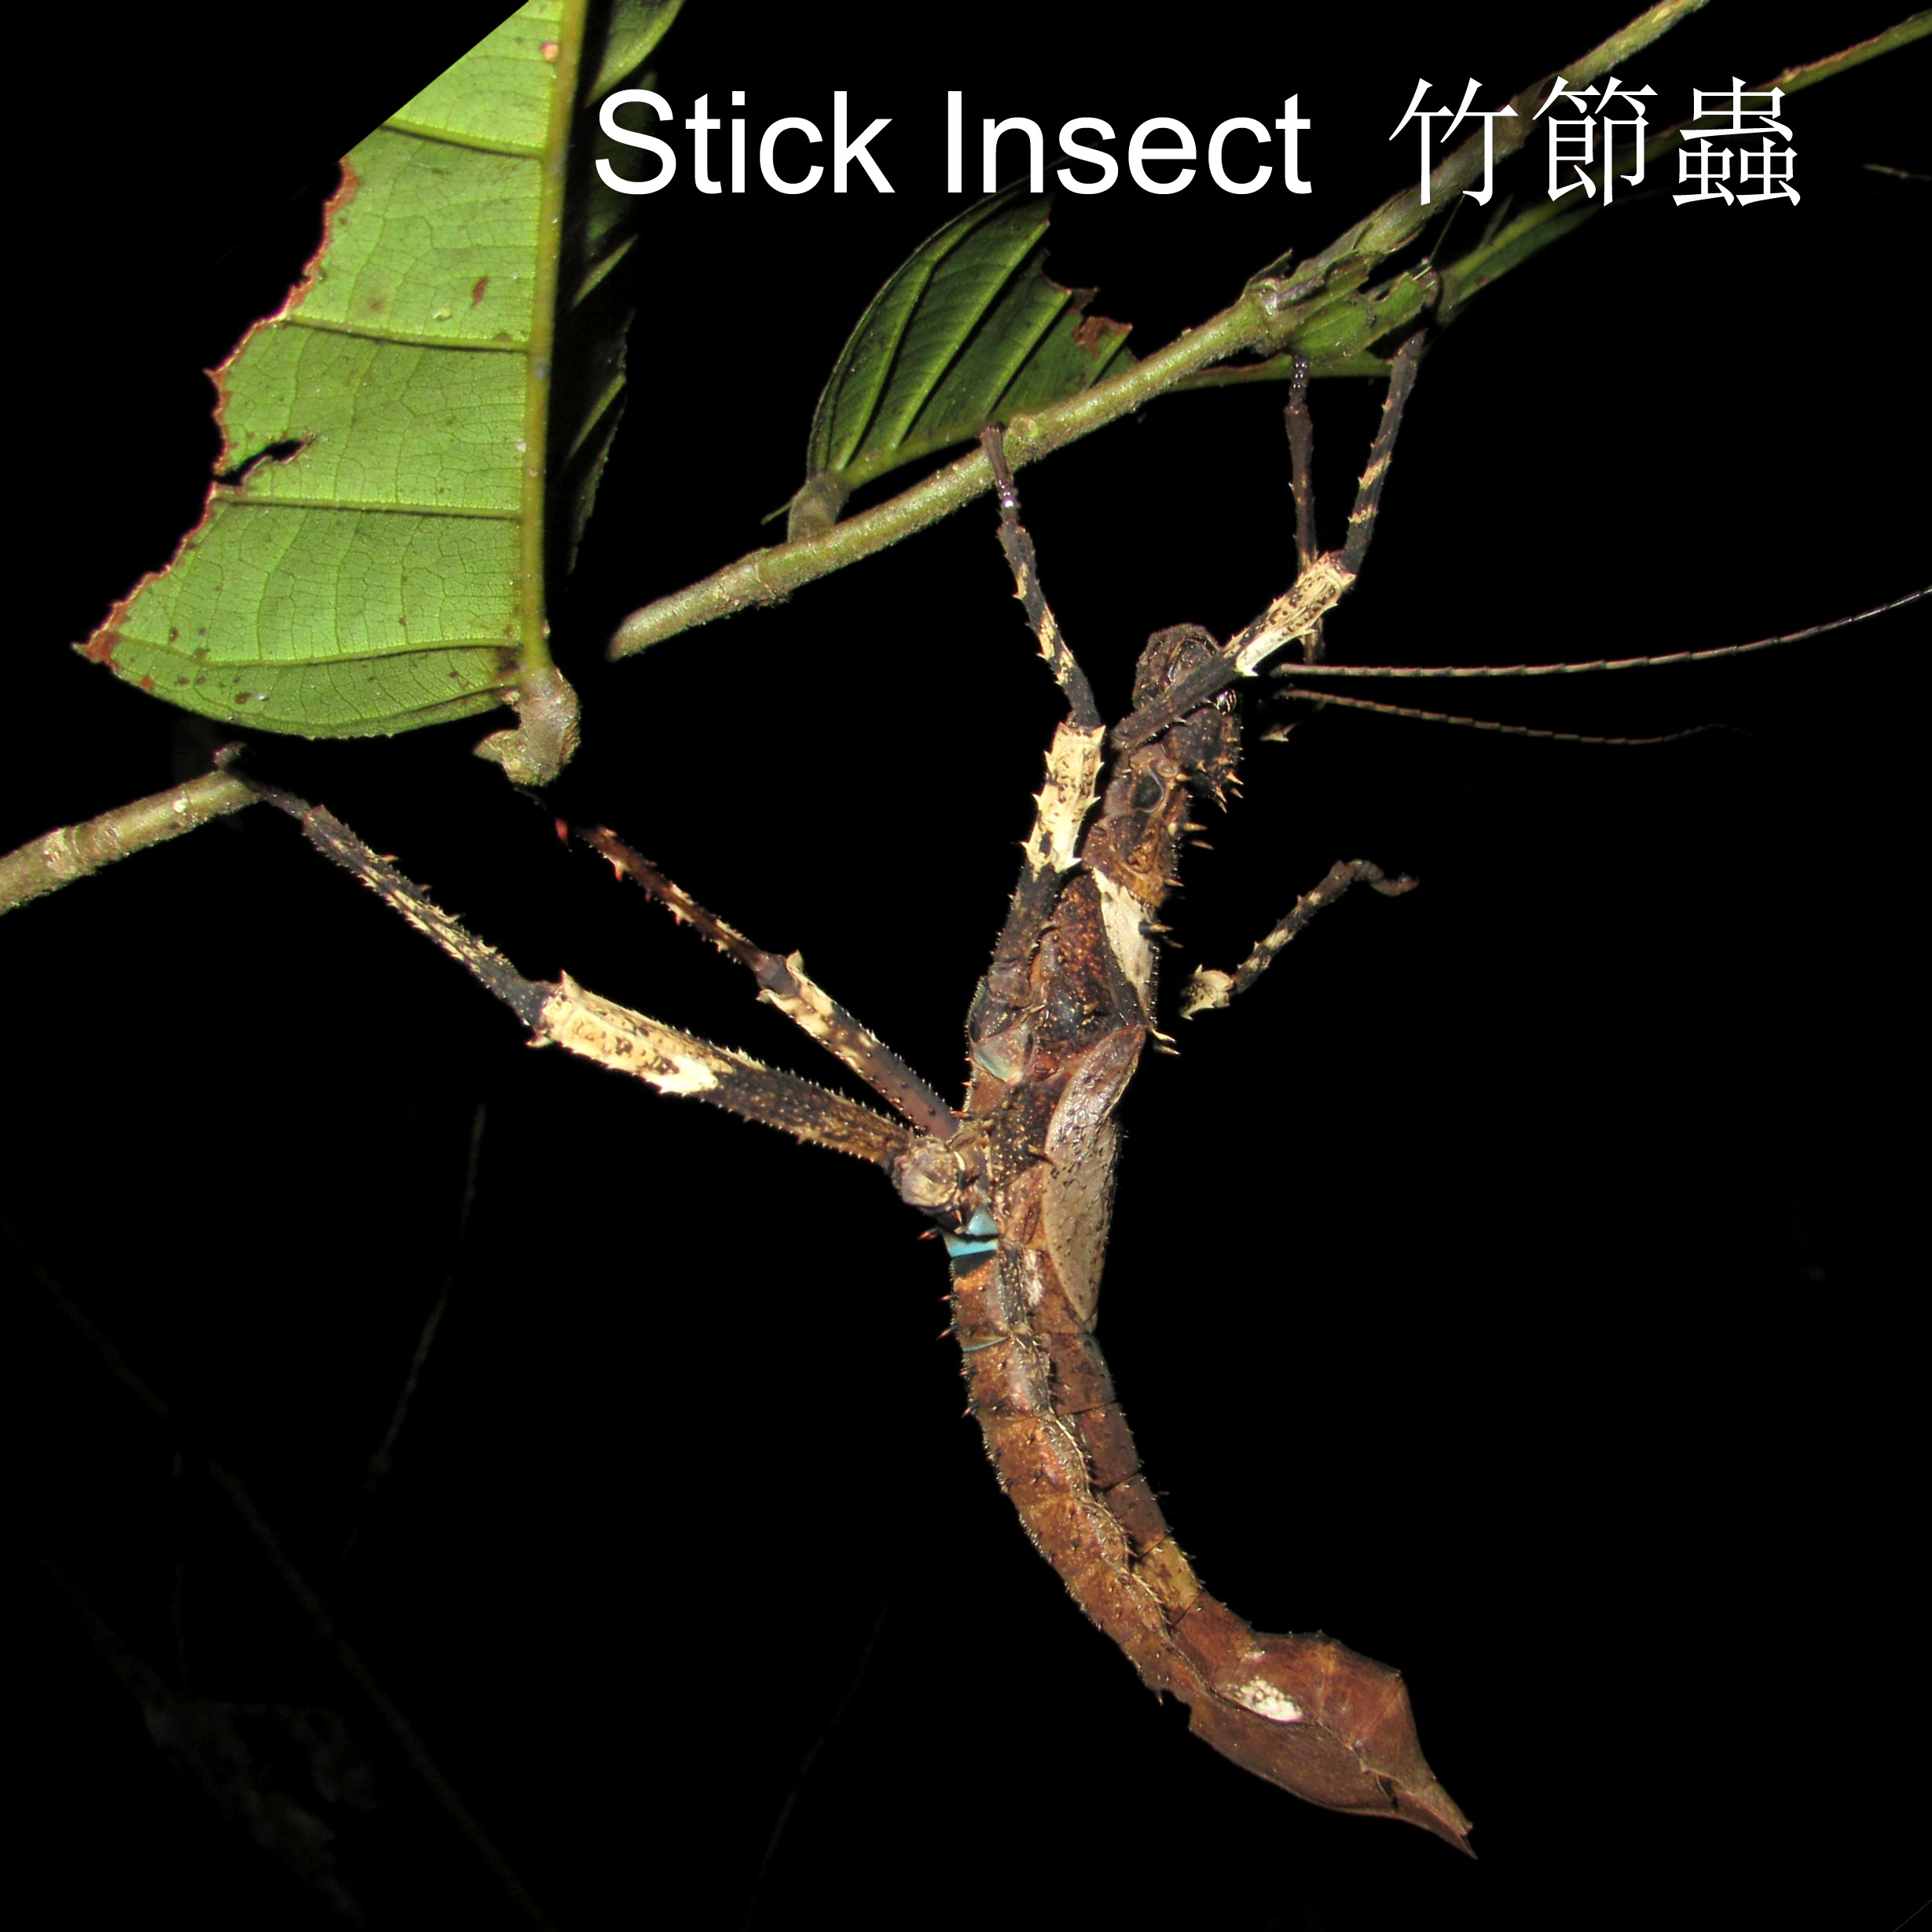 Stick Insect 竹節蟲